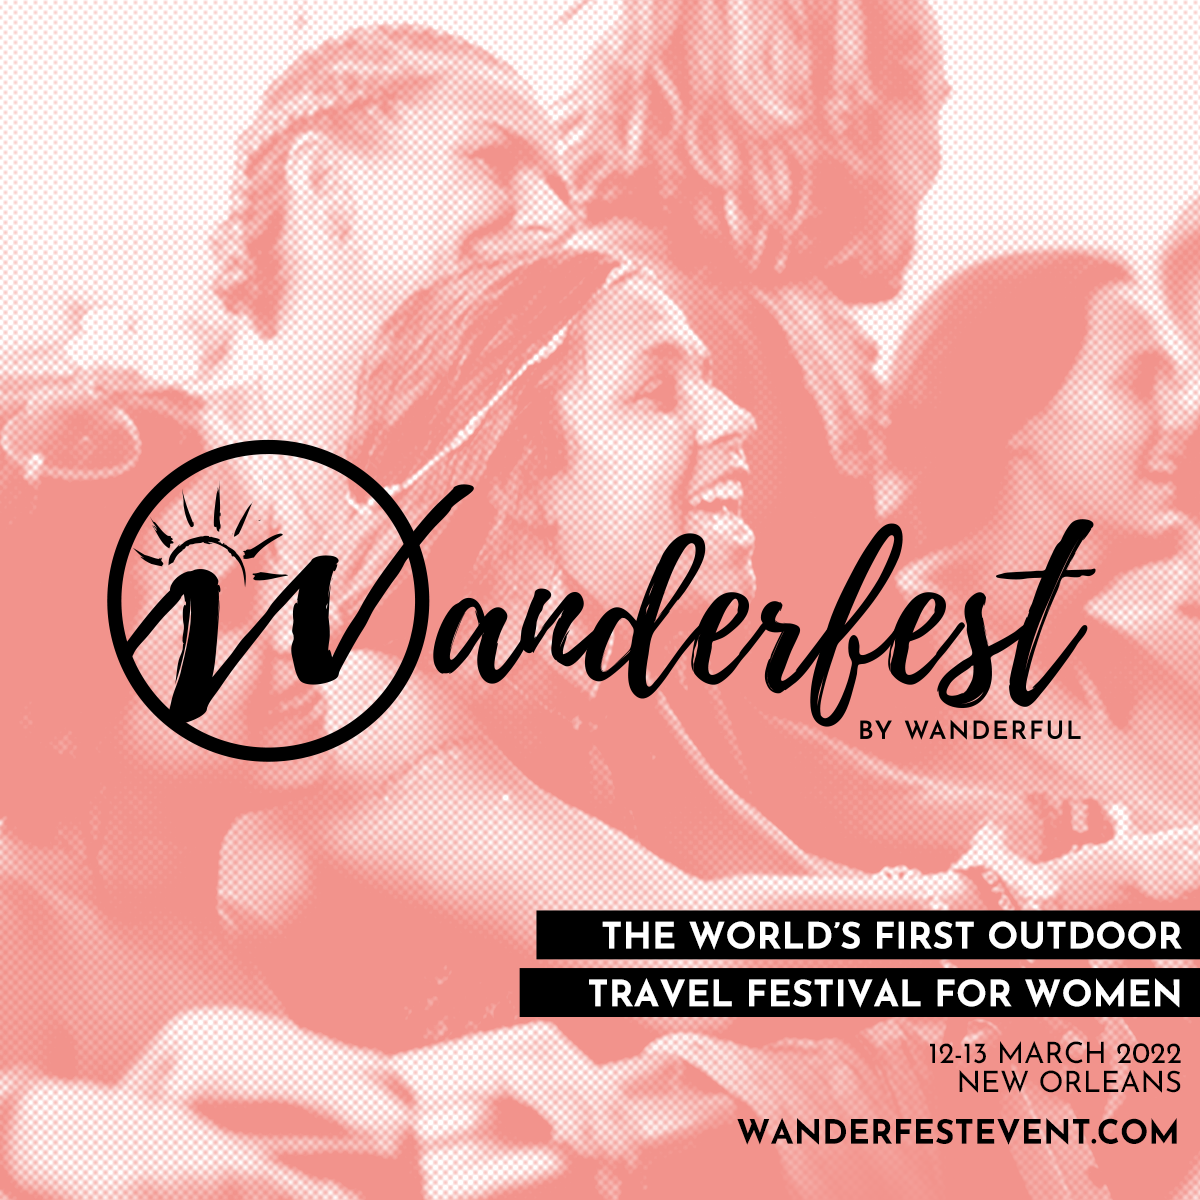 Promo graphic for Wanderfest by Wanderful happening in New Orleans in March 2022